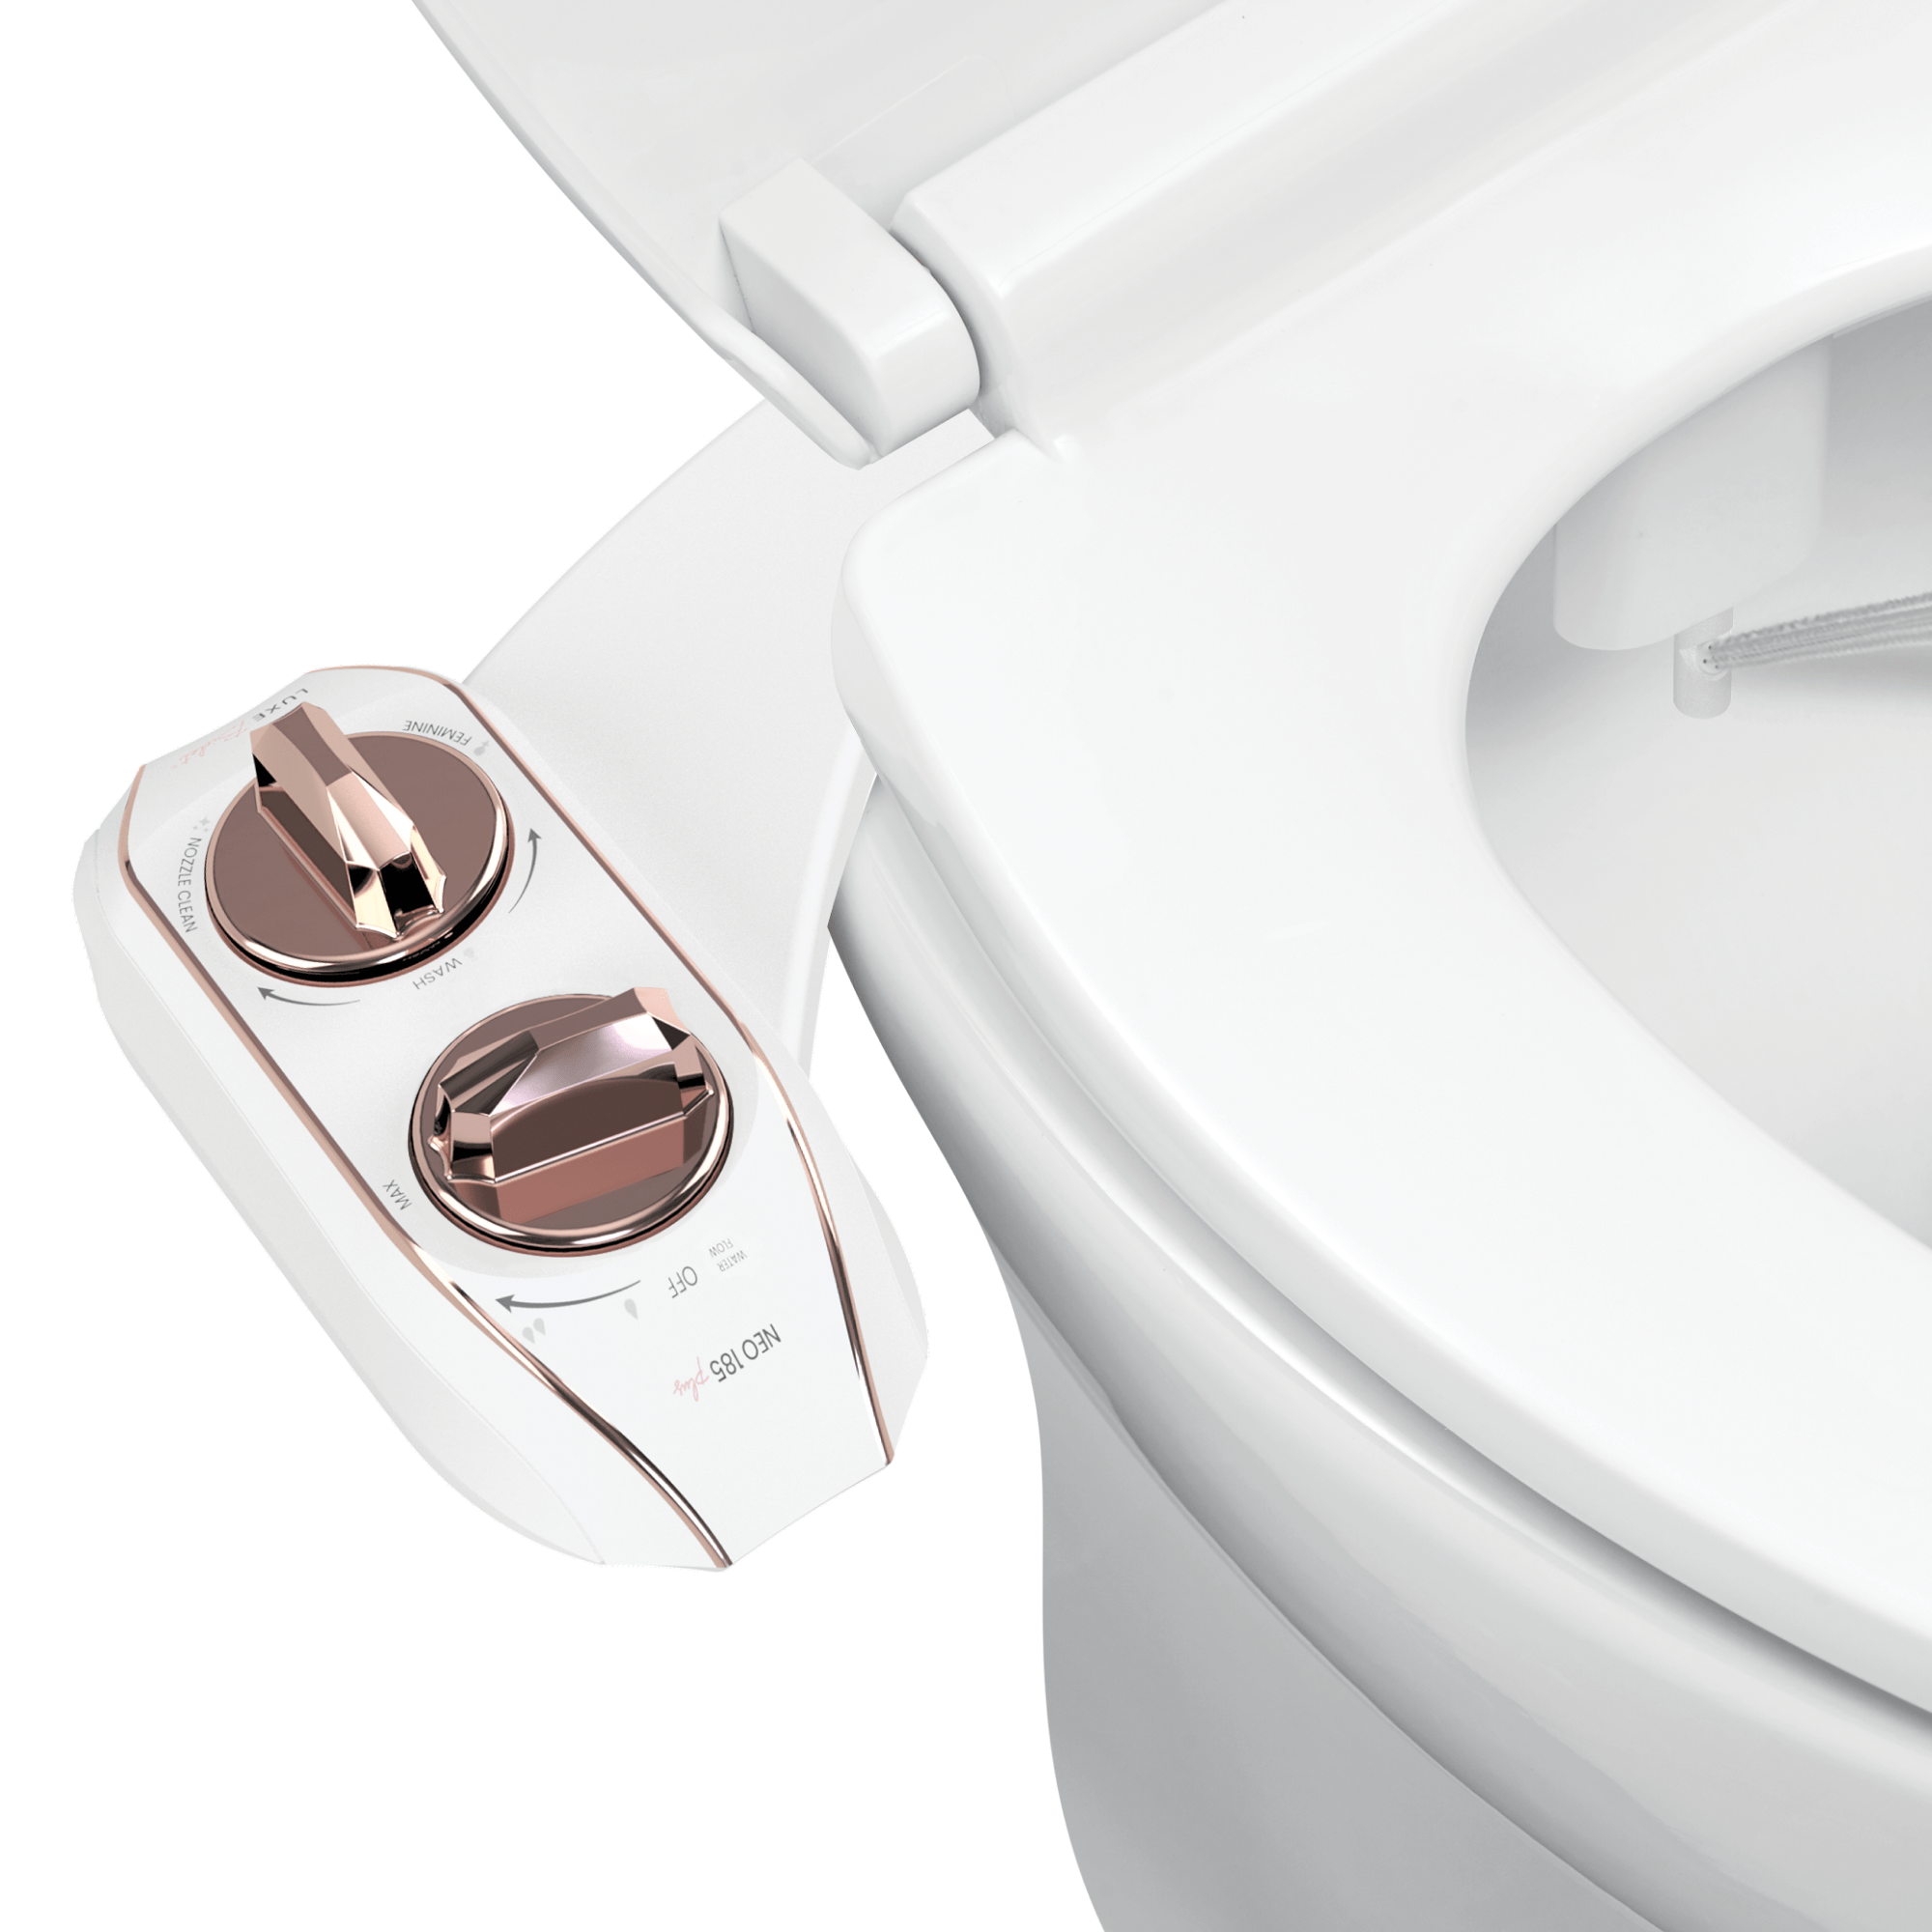 NEO 185 Plus: Imperfect Packaging - NEO 185 Plus Rose Gold installed on a toilet with water spraying from nozzles